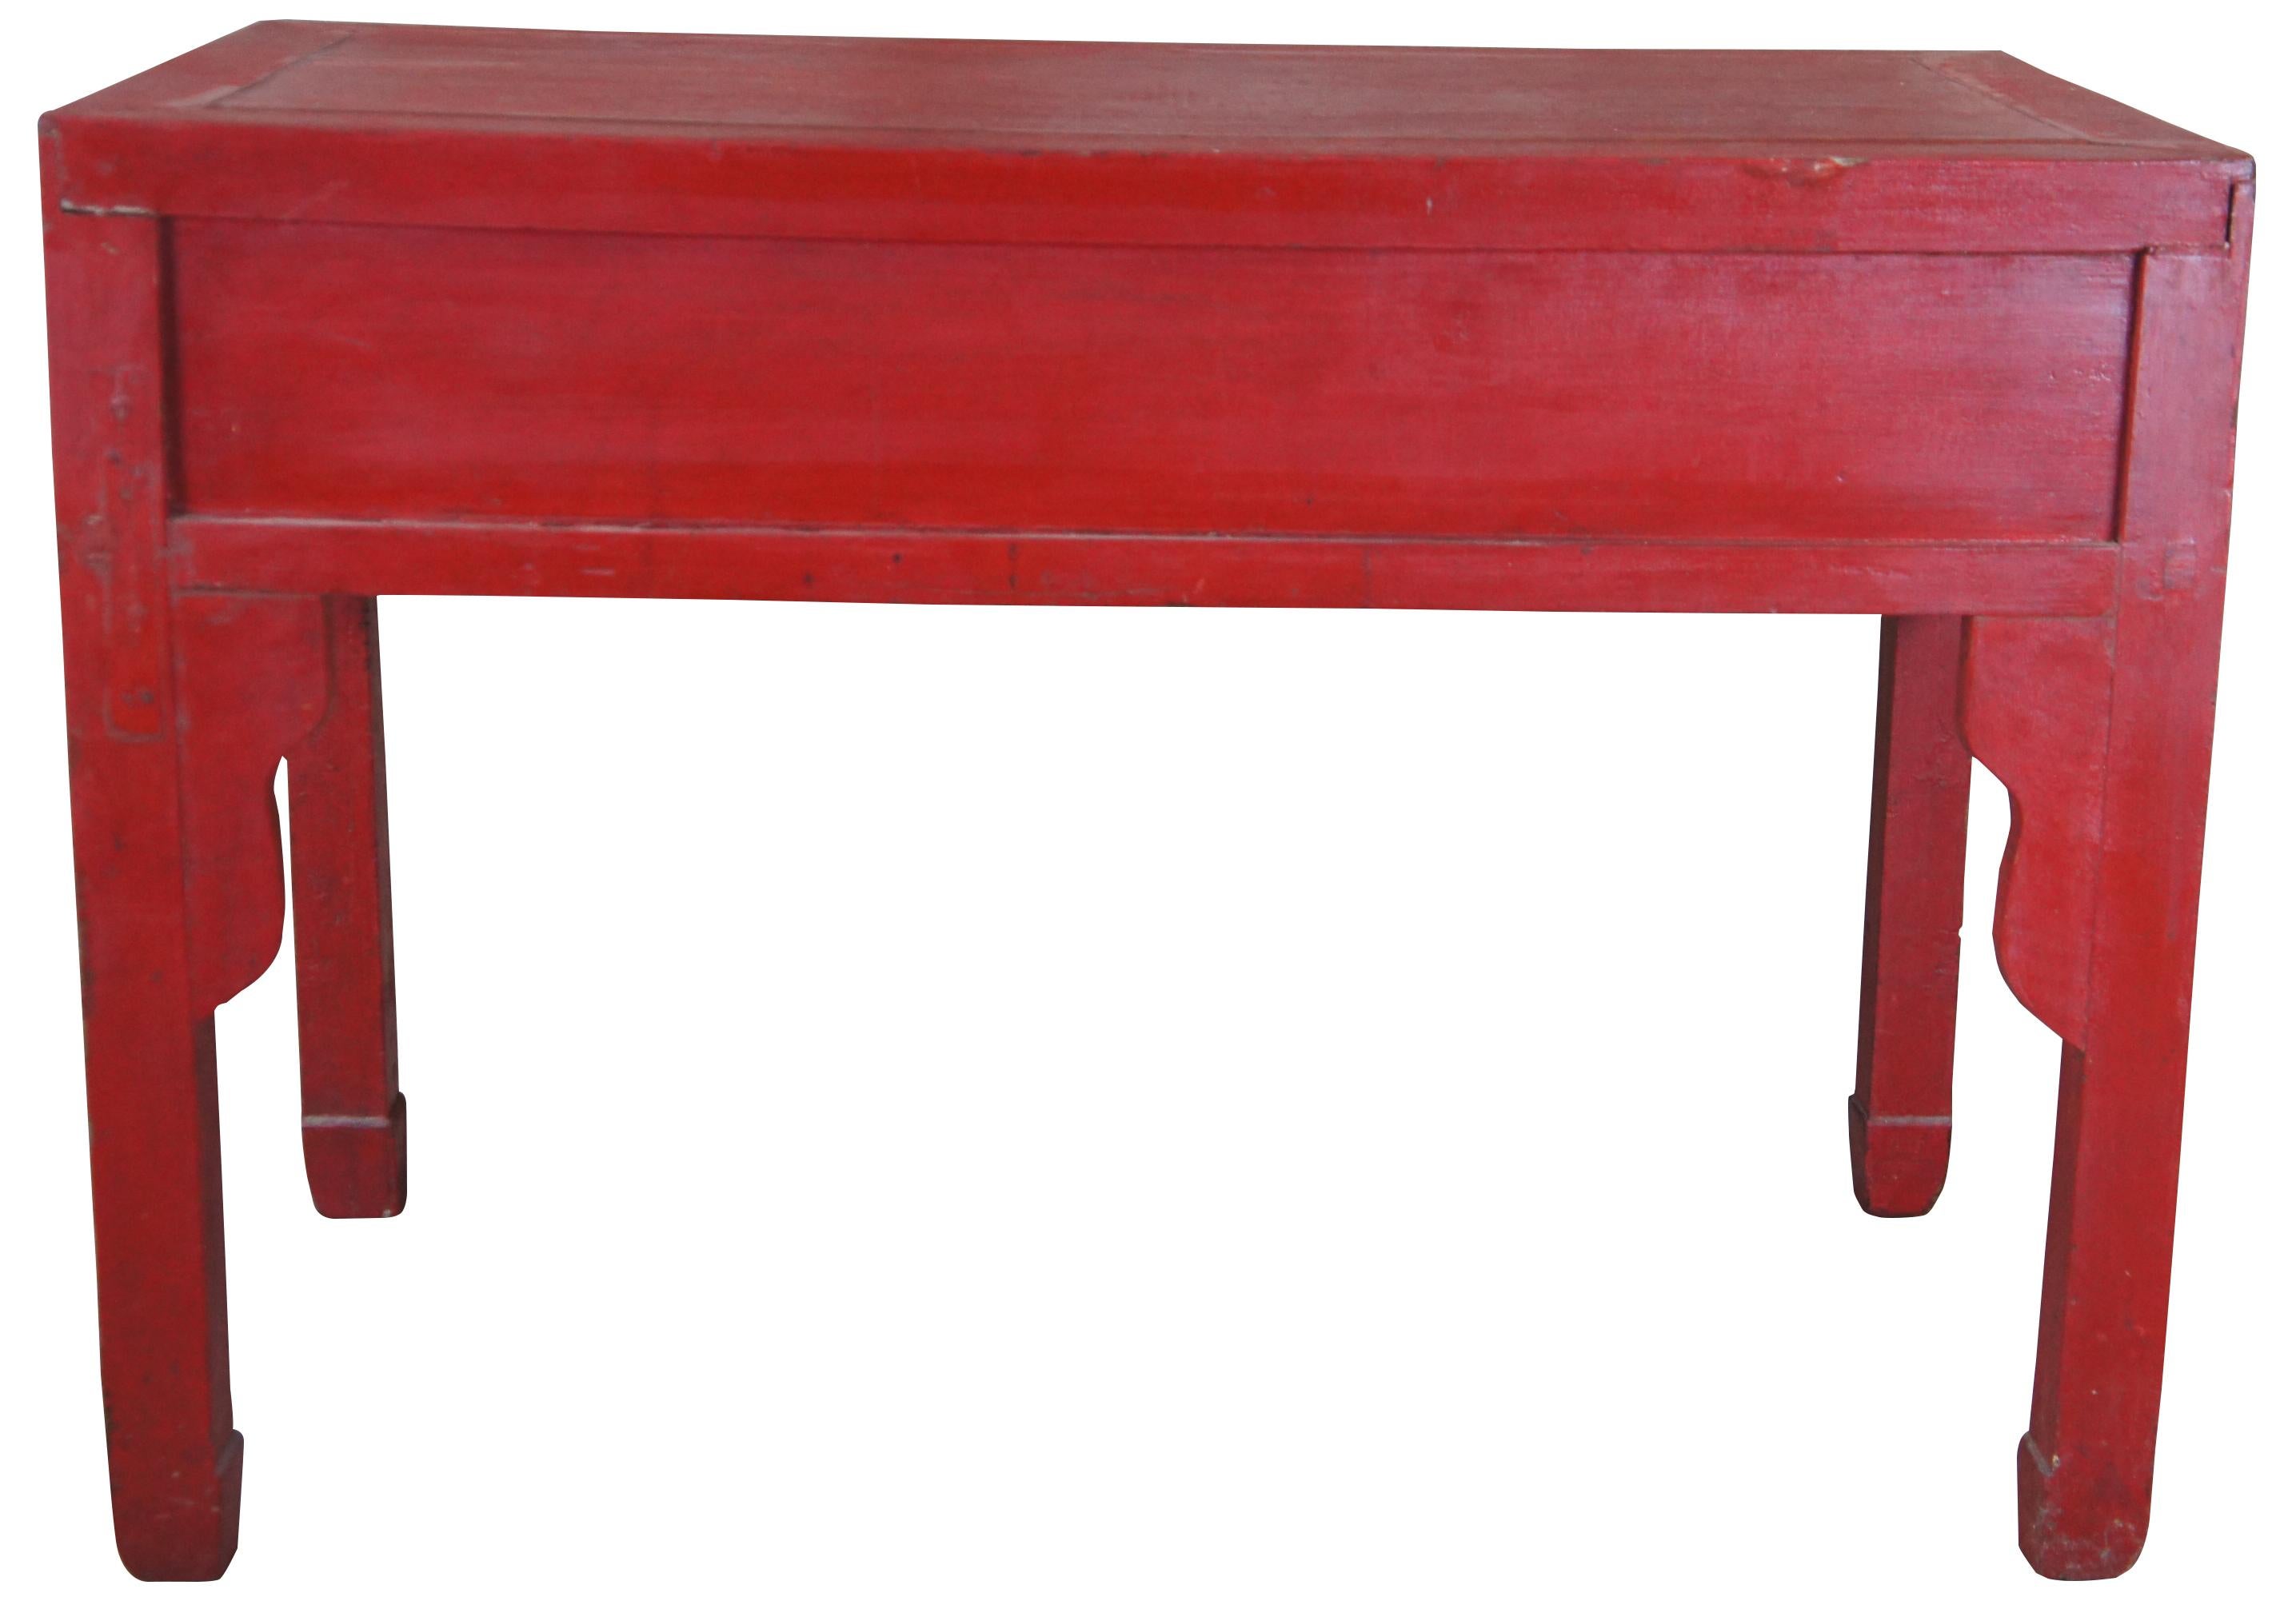 antique chinese altar table